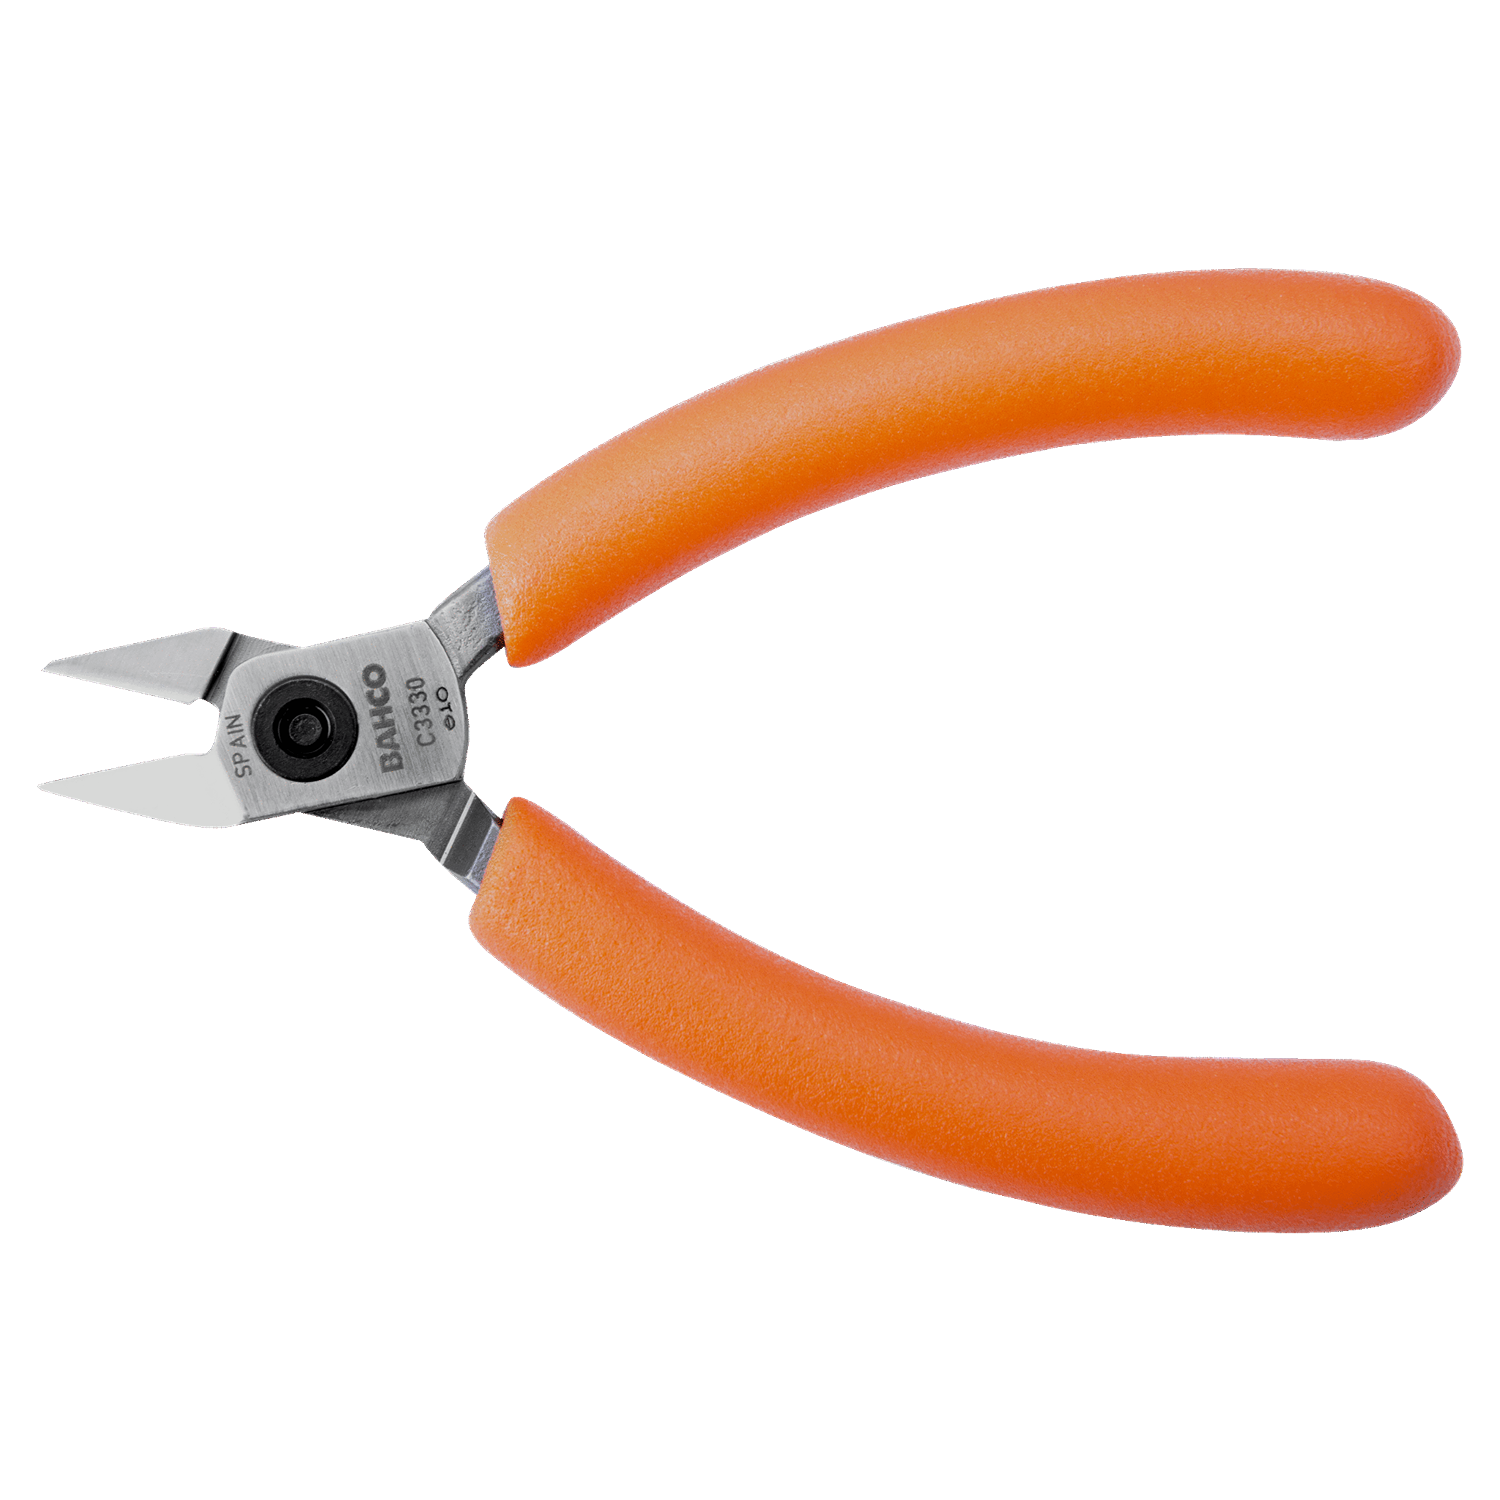 BAHCO C3330 Compact Side Cutting Plier with Orange PVC Handle - Premium Cutting Plier from BAHCO - Shop now at Yew Aik.